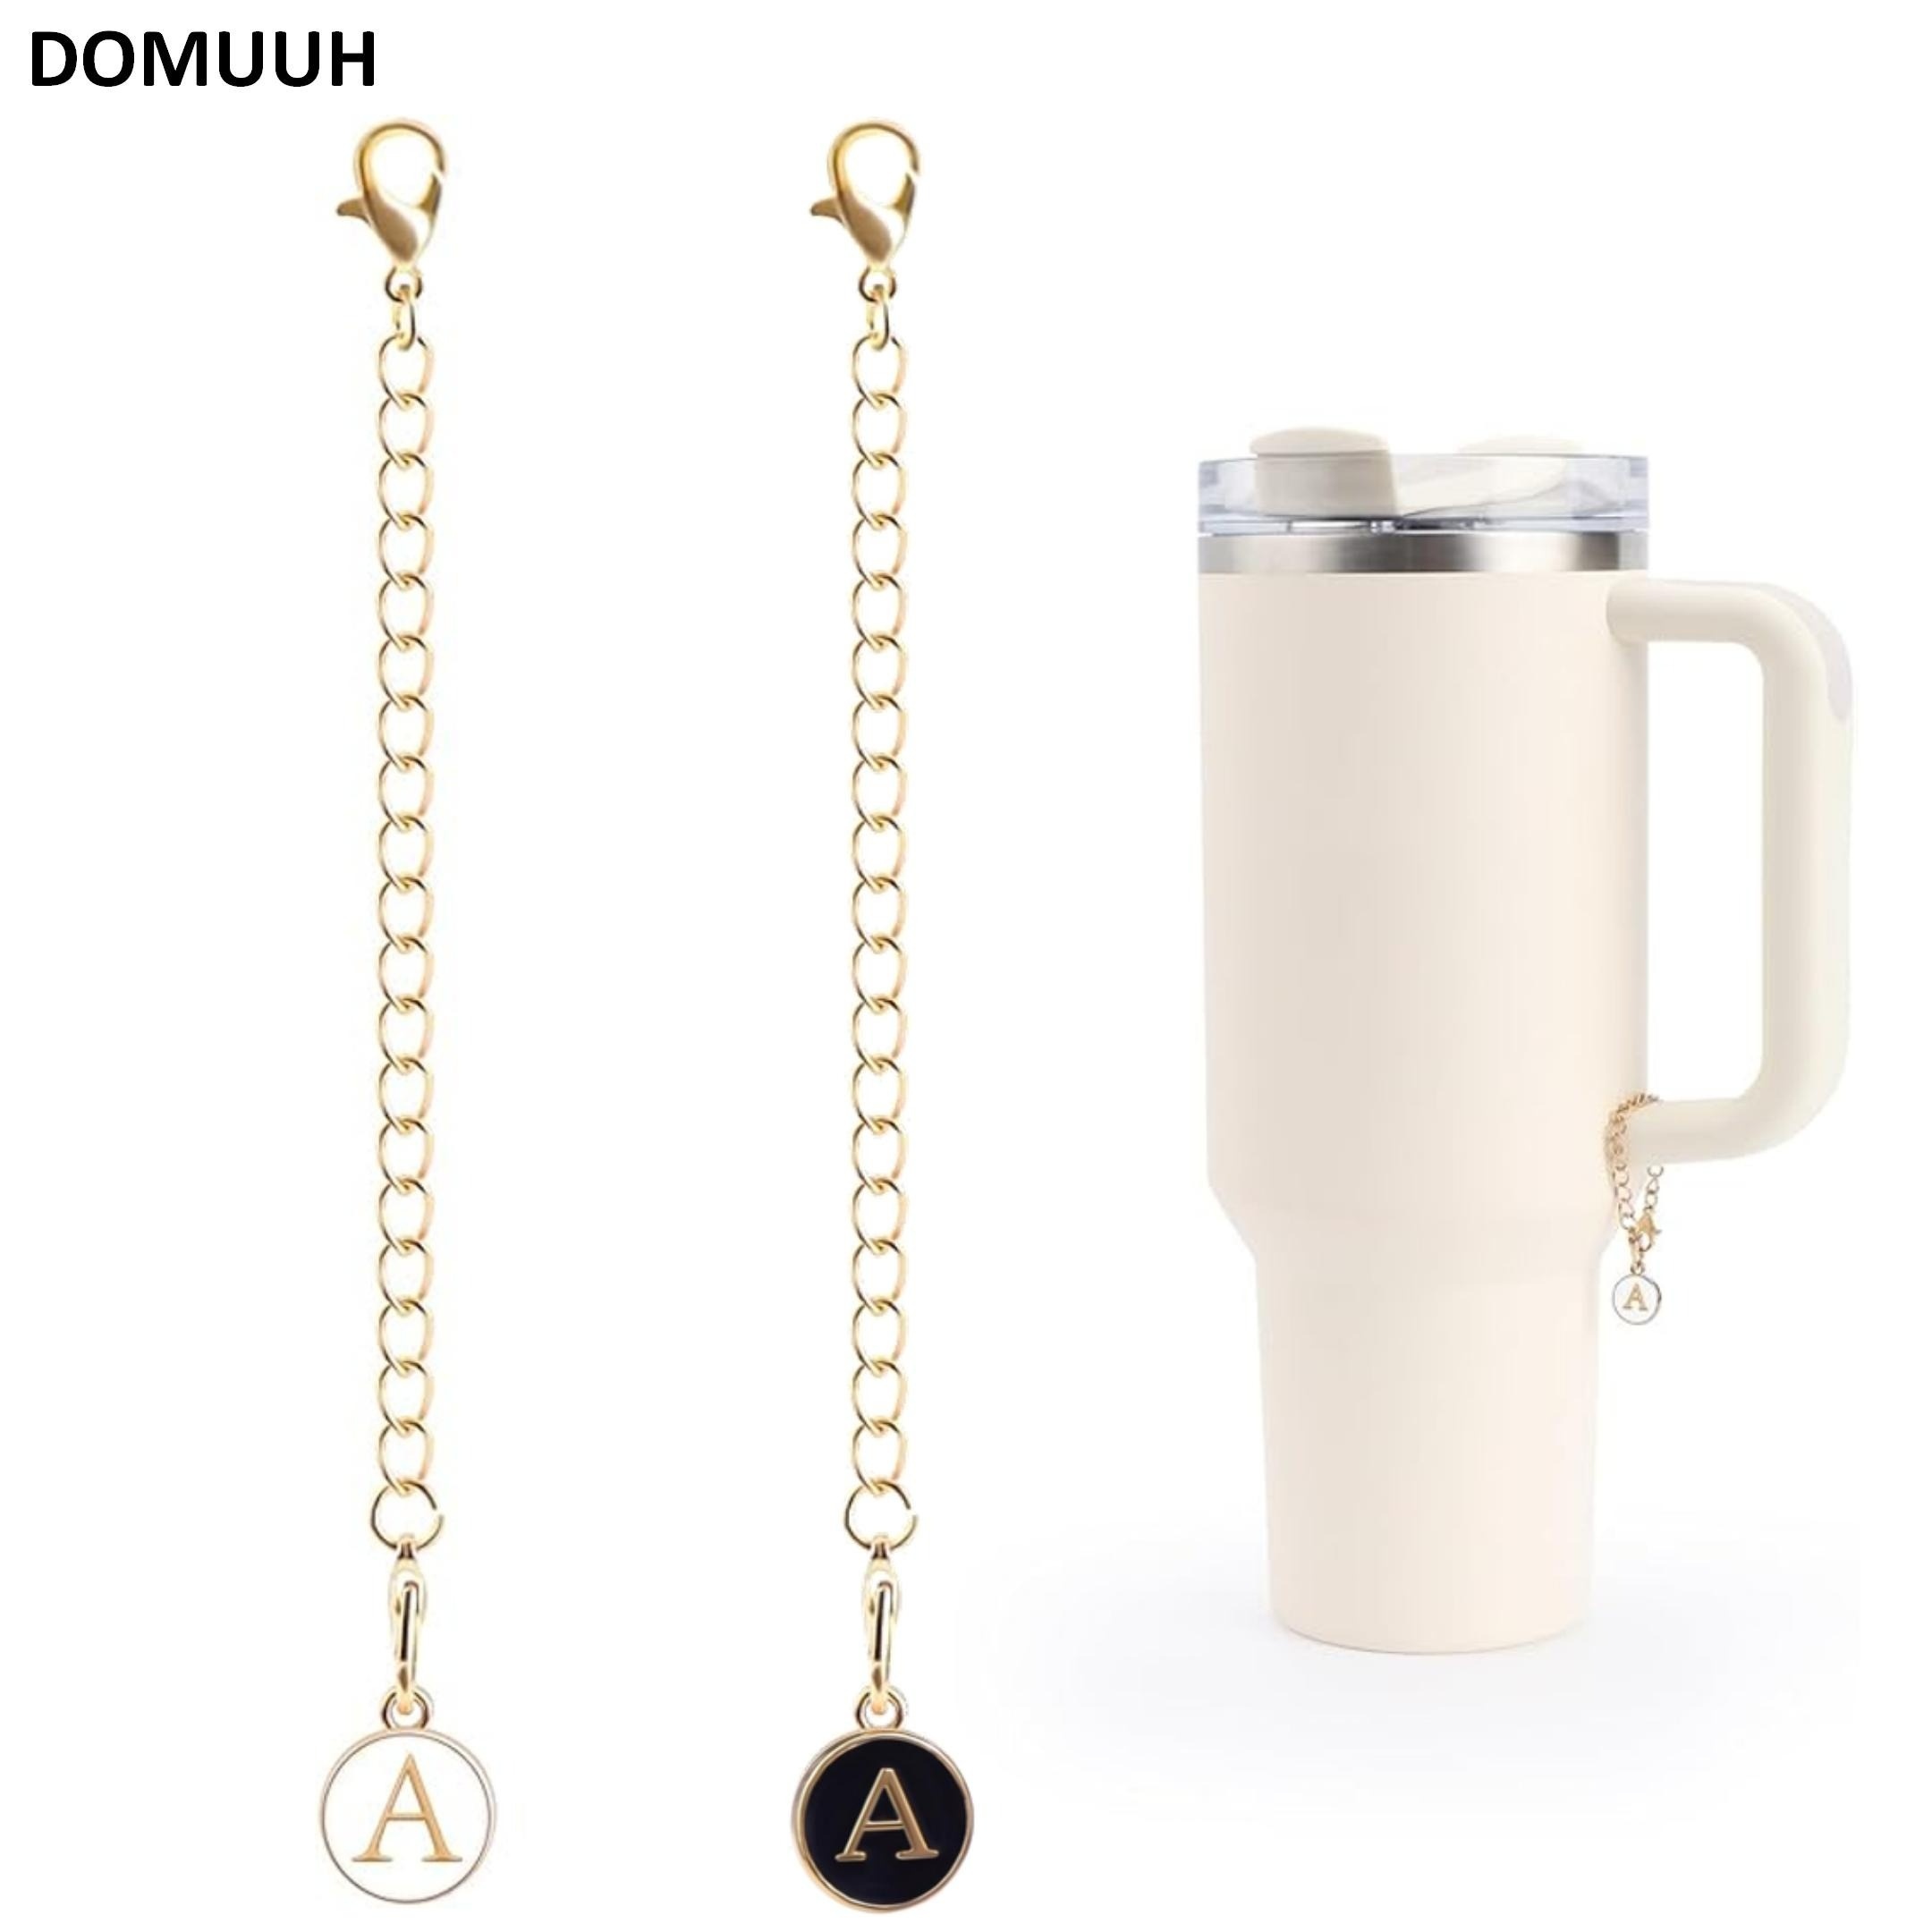 MOTAIN Letter Charm Accessories for Stanley Cup,Name ID Letter Handle Charm for Stanley Tumbler,Water Cup Handle Identification Letter Charm